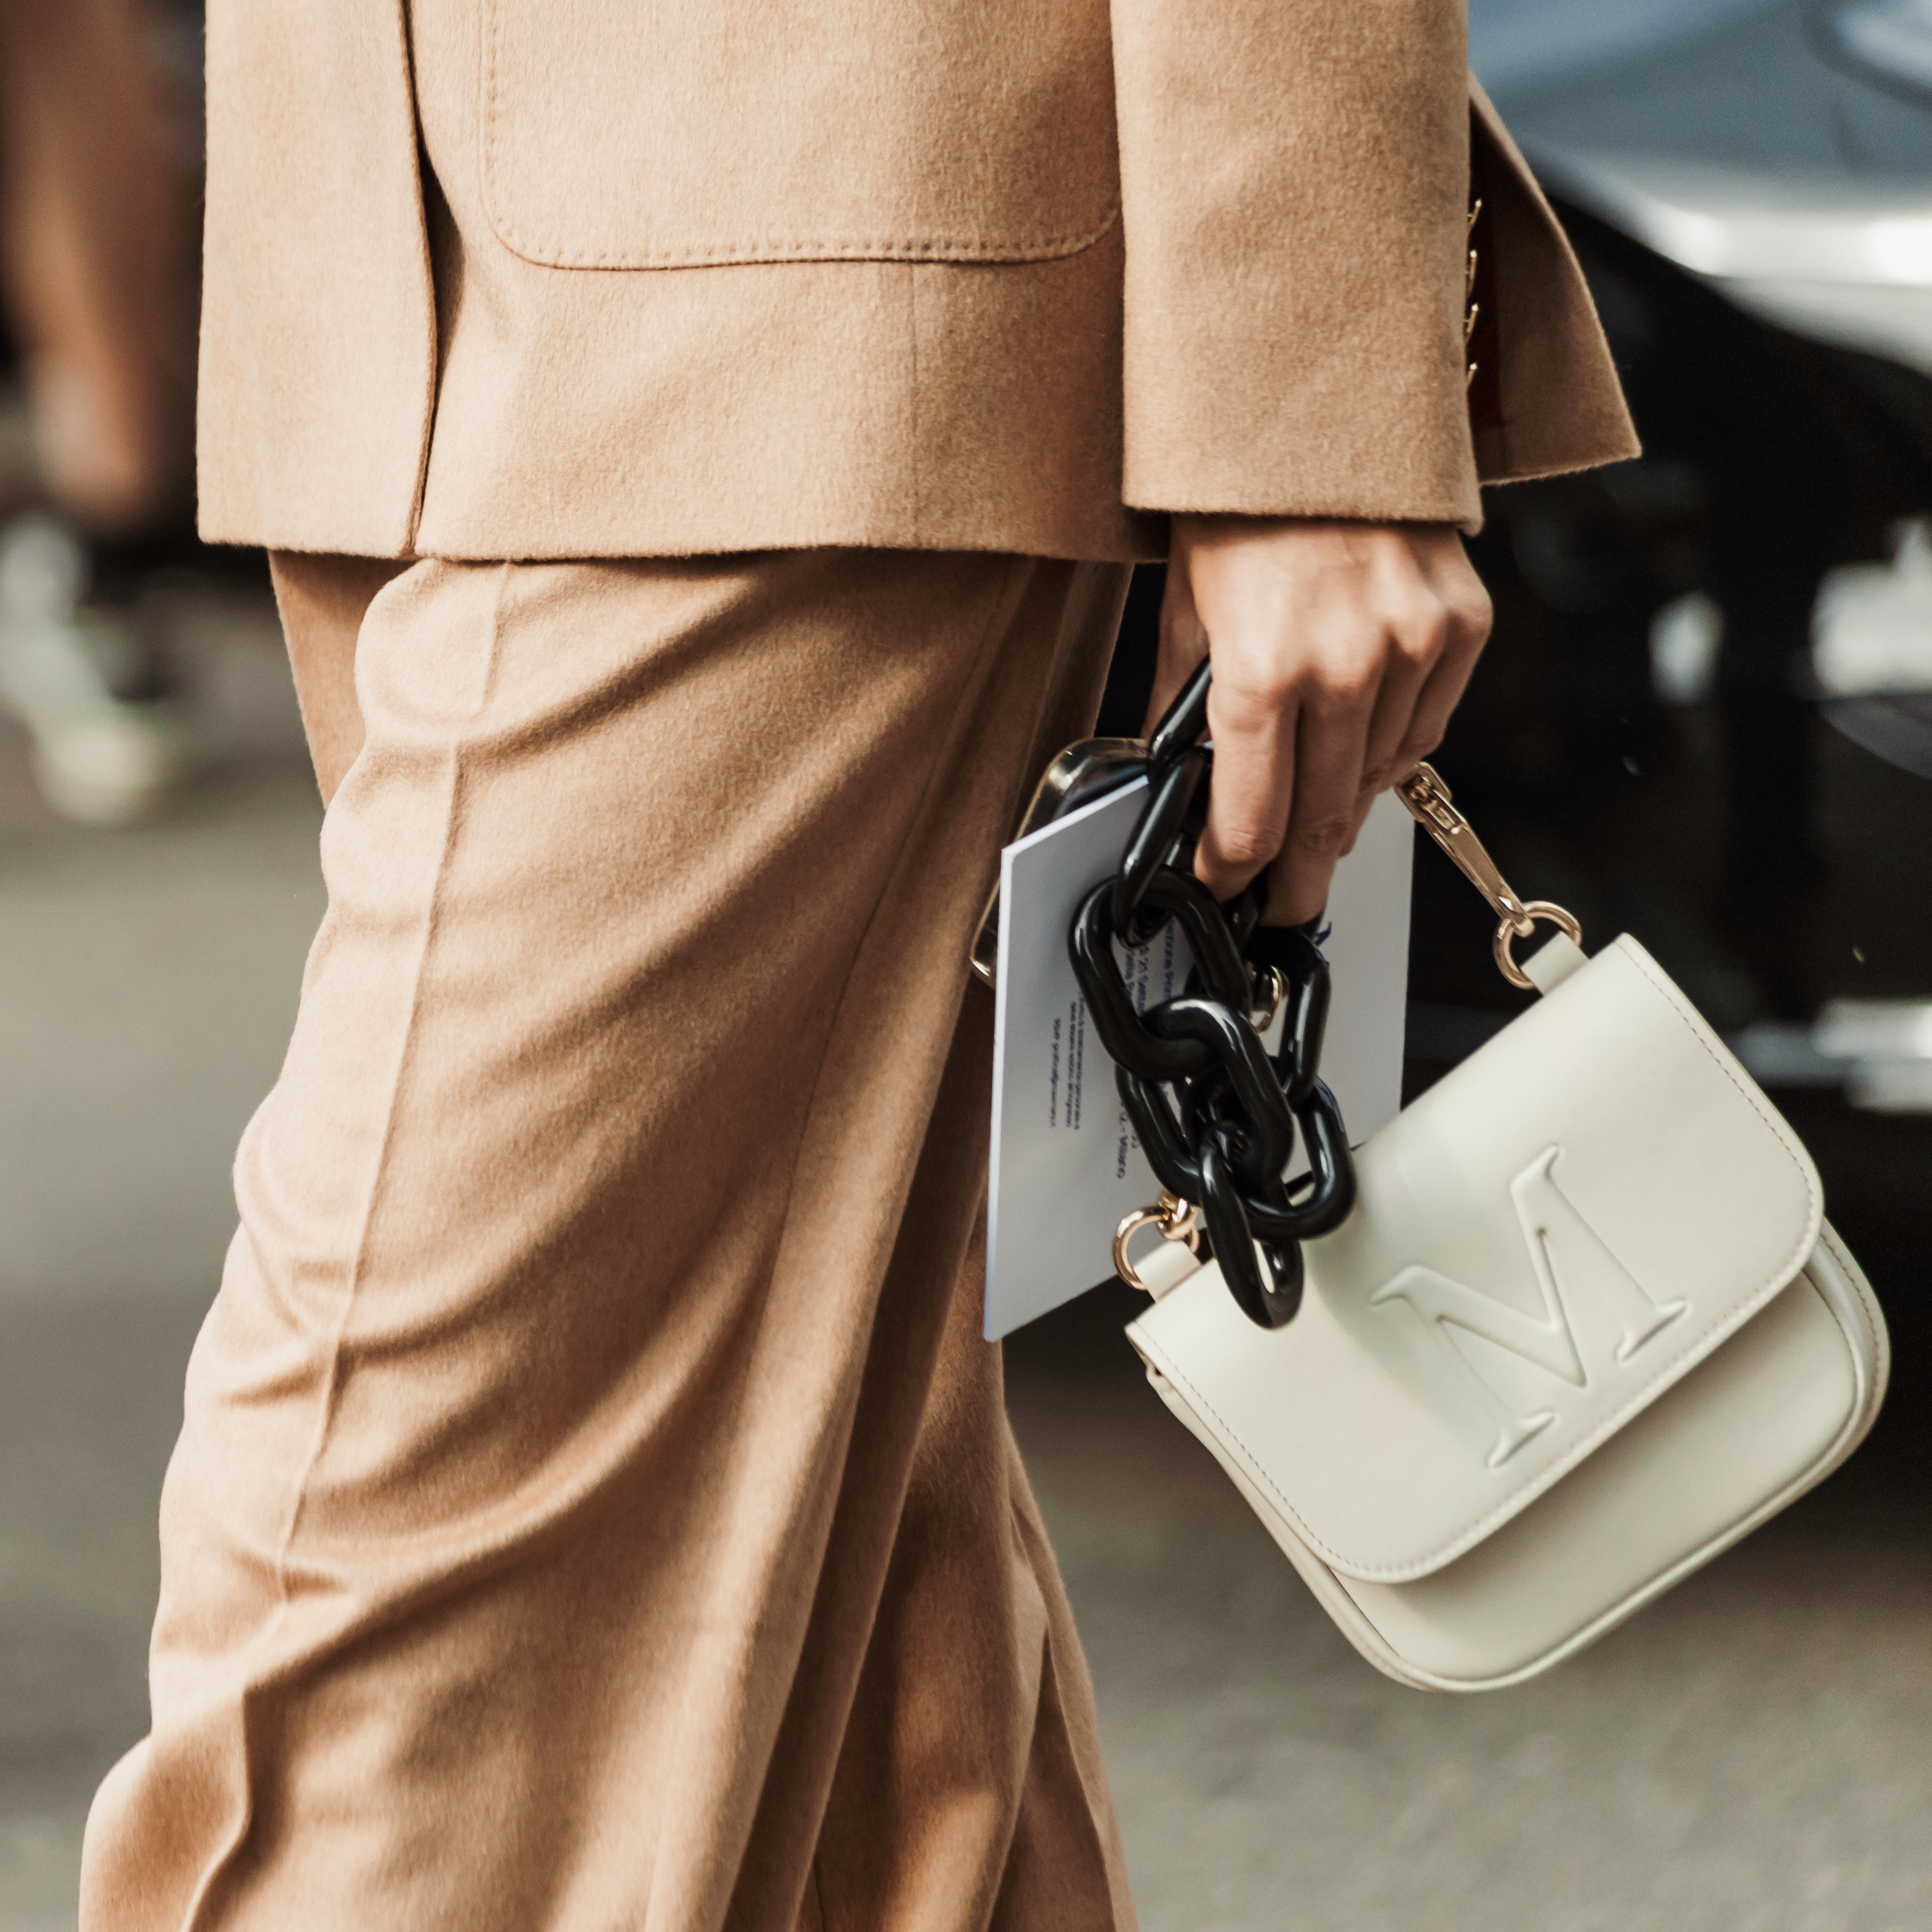 9 Essential Items To Keep In Your Purse At All Times